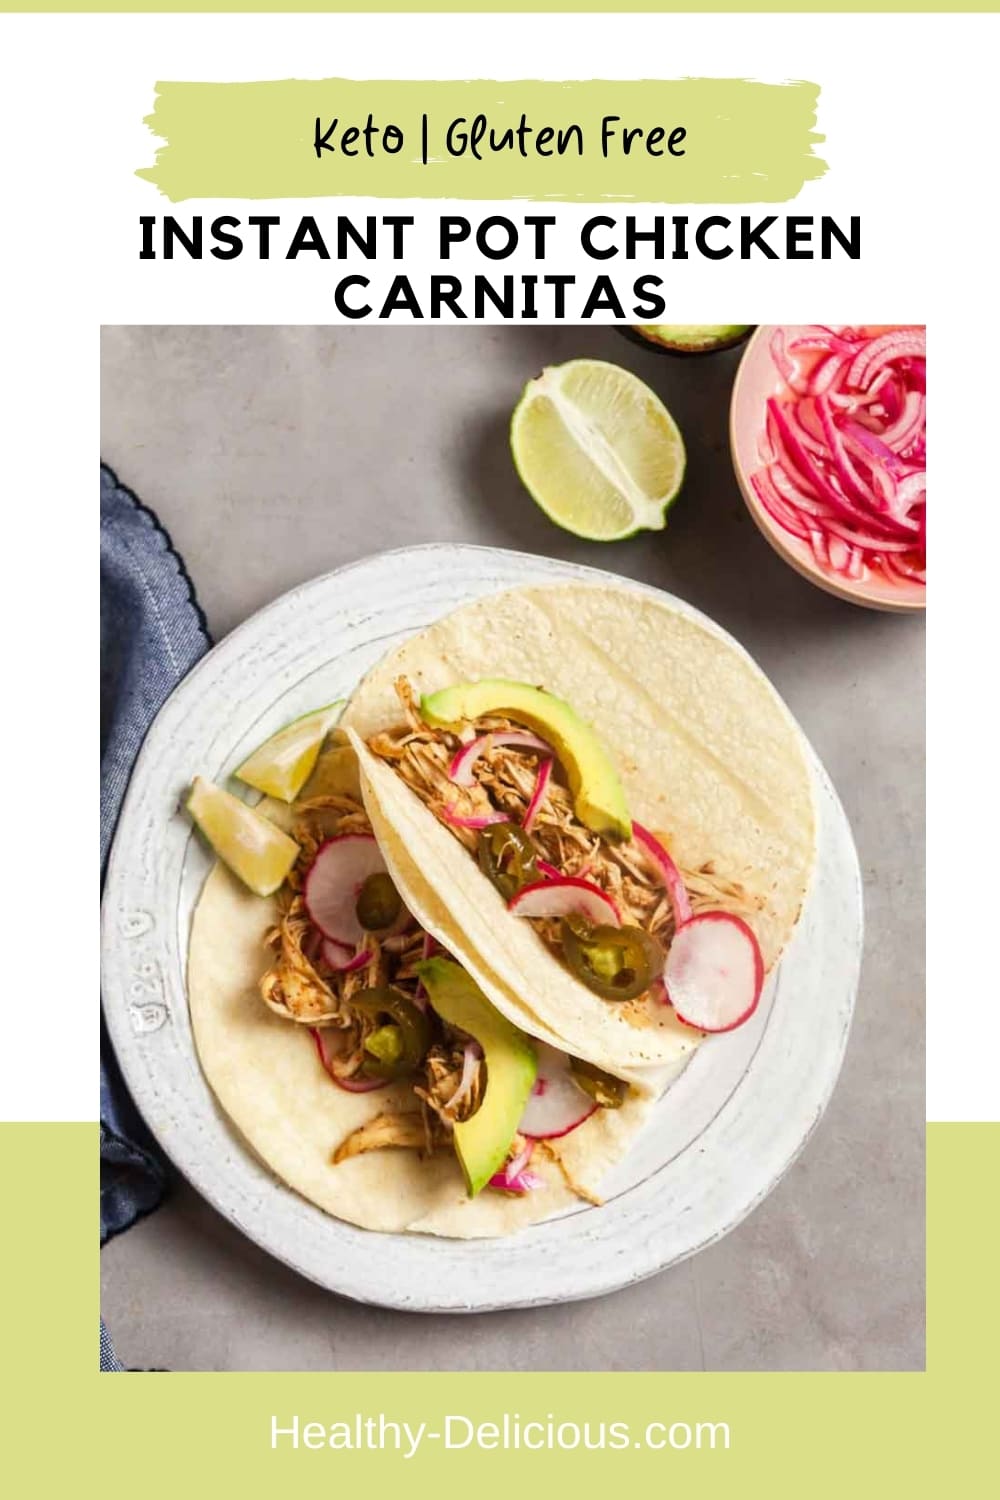 This Instant Pot chicken carnitas is a delicious and versatile 8-ingredient  dinner that's ready in just about a half-hour! Serve in tortillas for tacos, over nachos on a salad, or in a baked potato. Low Carb, Keto, and Gluten-Free! via @HealthyDelish